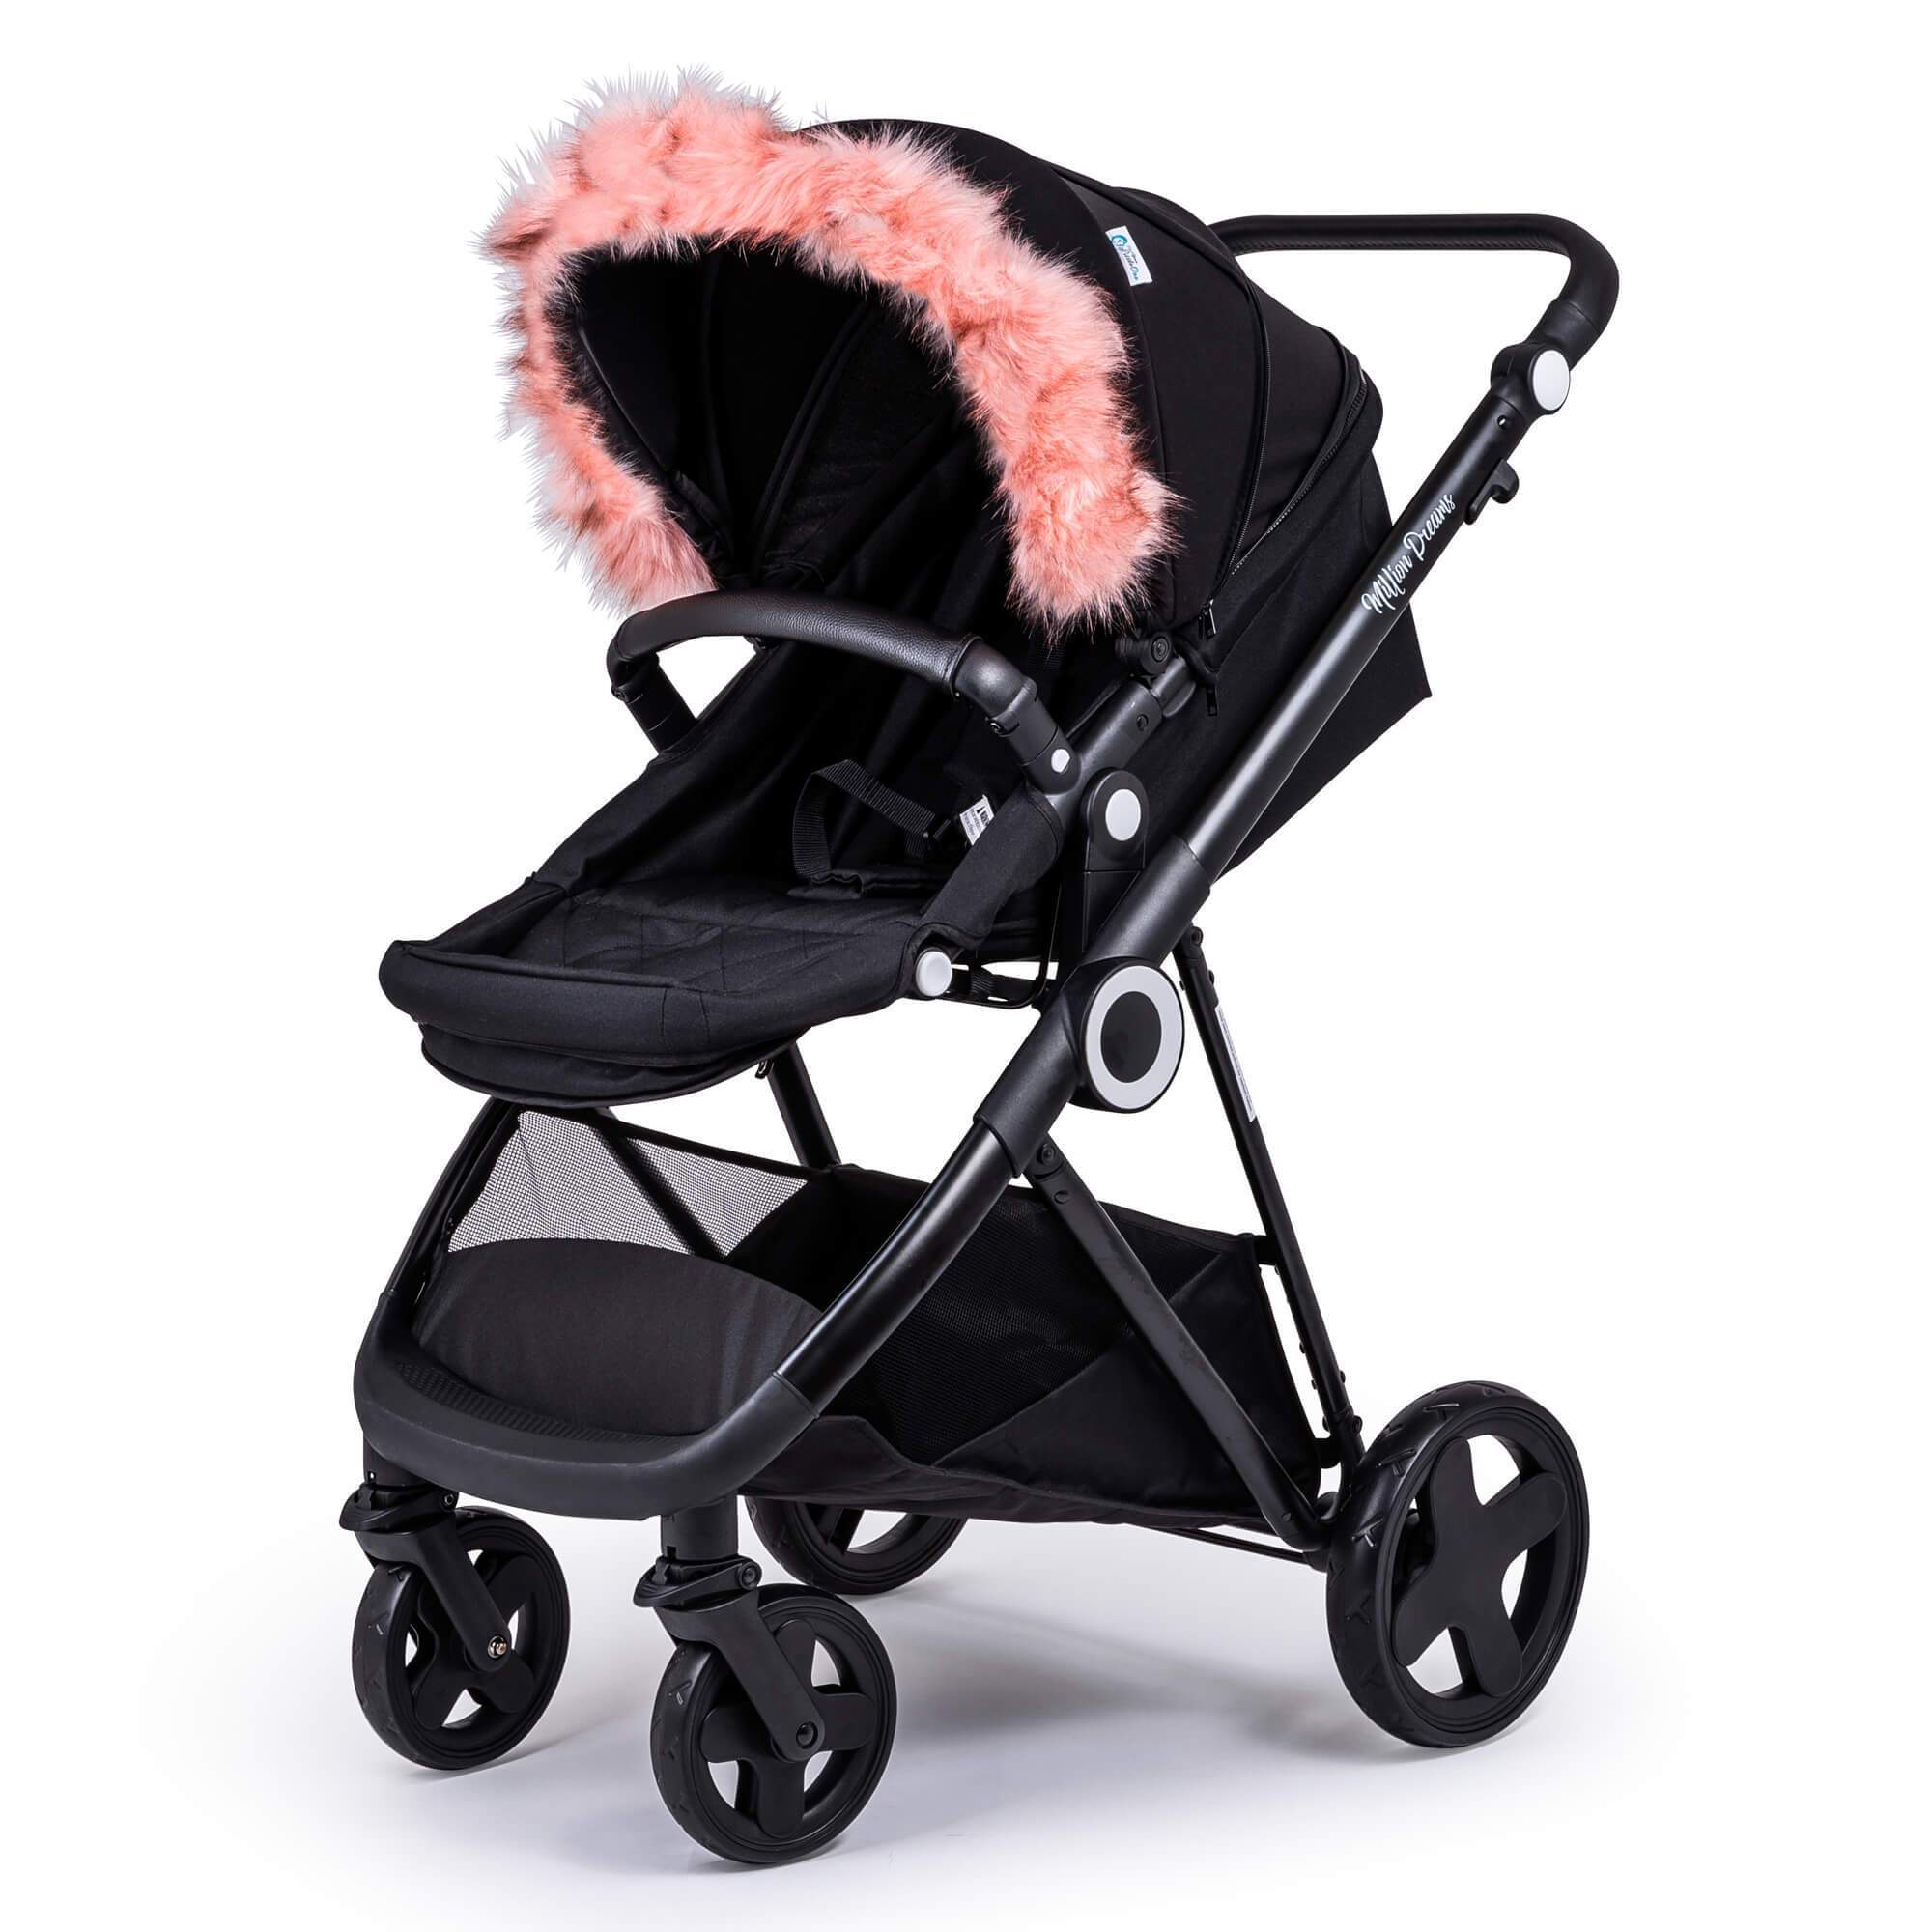 Pram Fur Hood Trim Attachment for Pushchair Compatible with Zeta - Pink / Fits All Models | For Your Little One